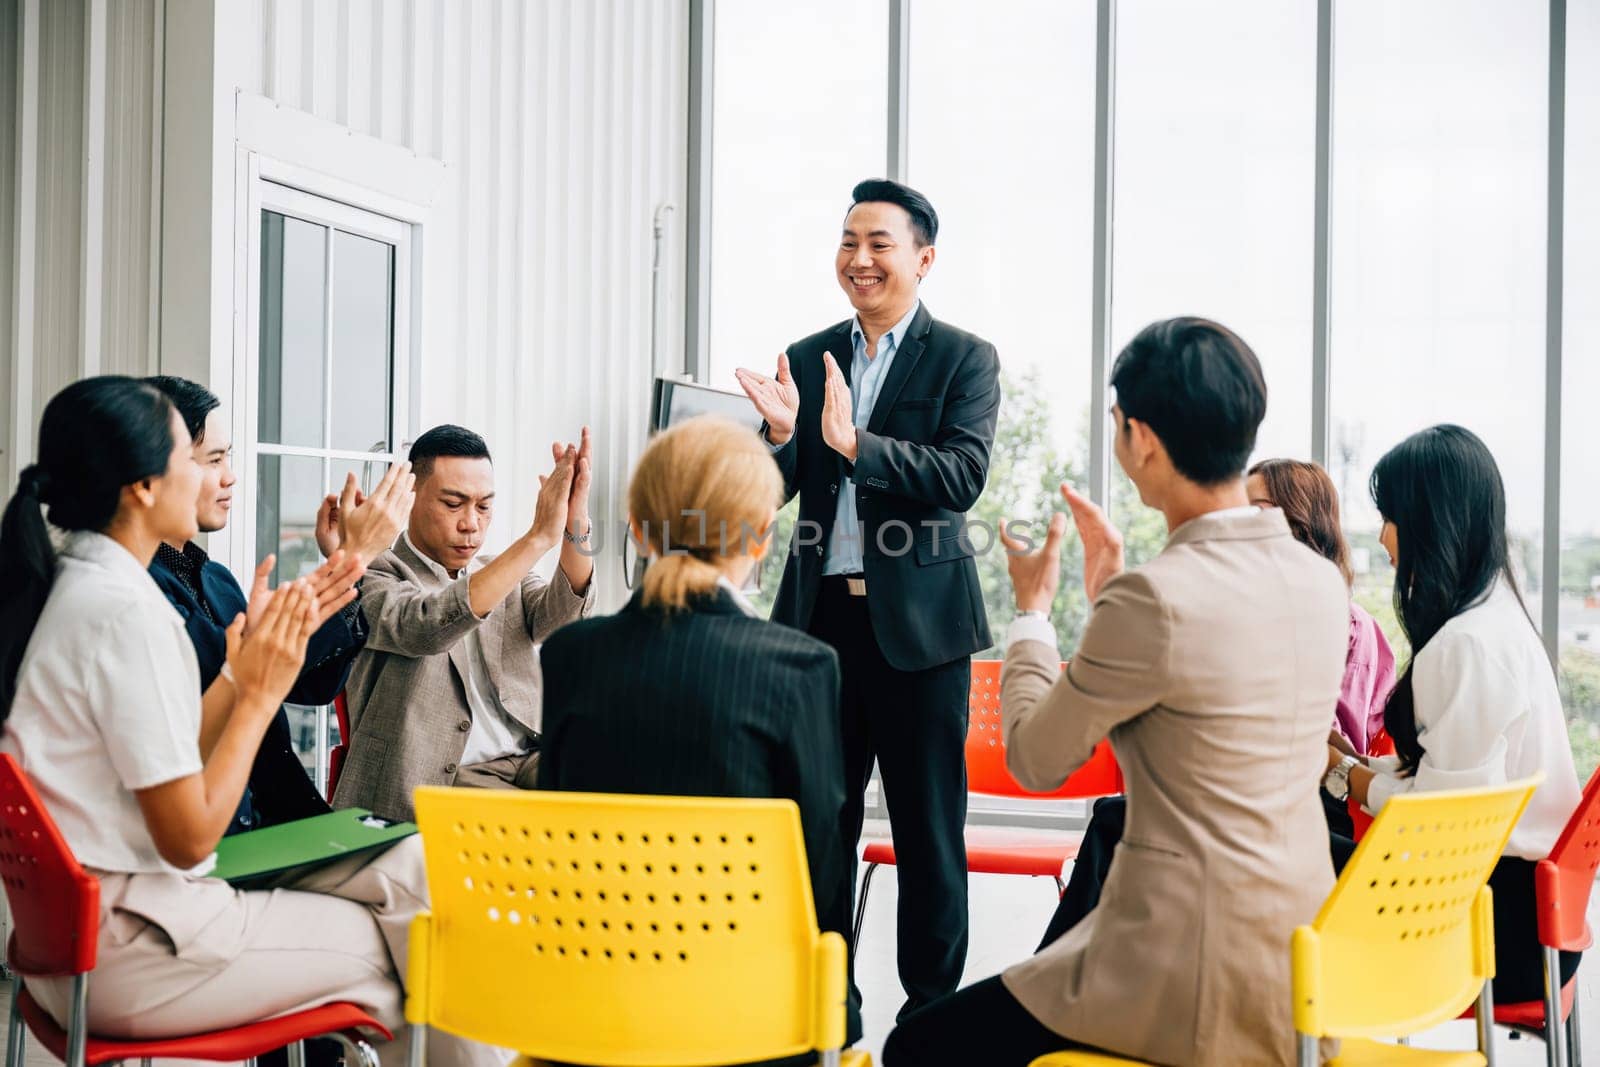 Asian man presents his work in meeting room receiving praise and compliments from colleagues. The audience claps with happiness celebrating his achievement. It signifies teamwork and business success. by Sorapop